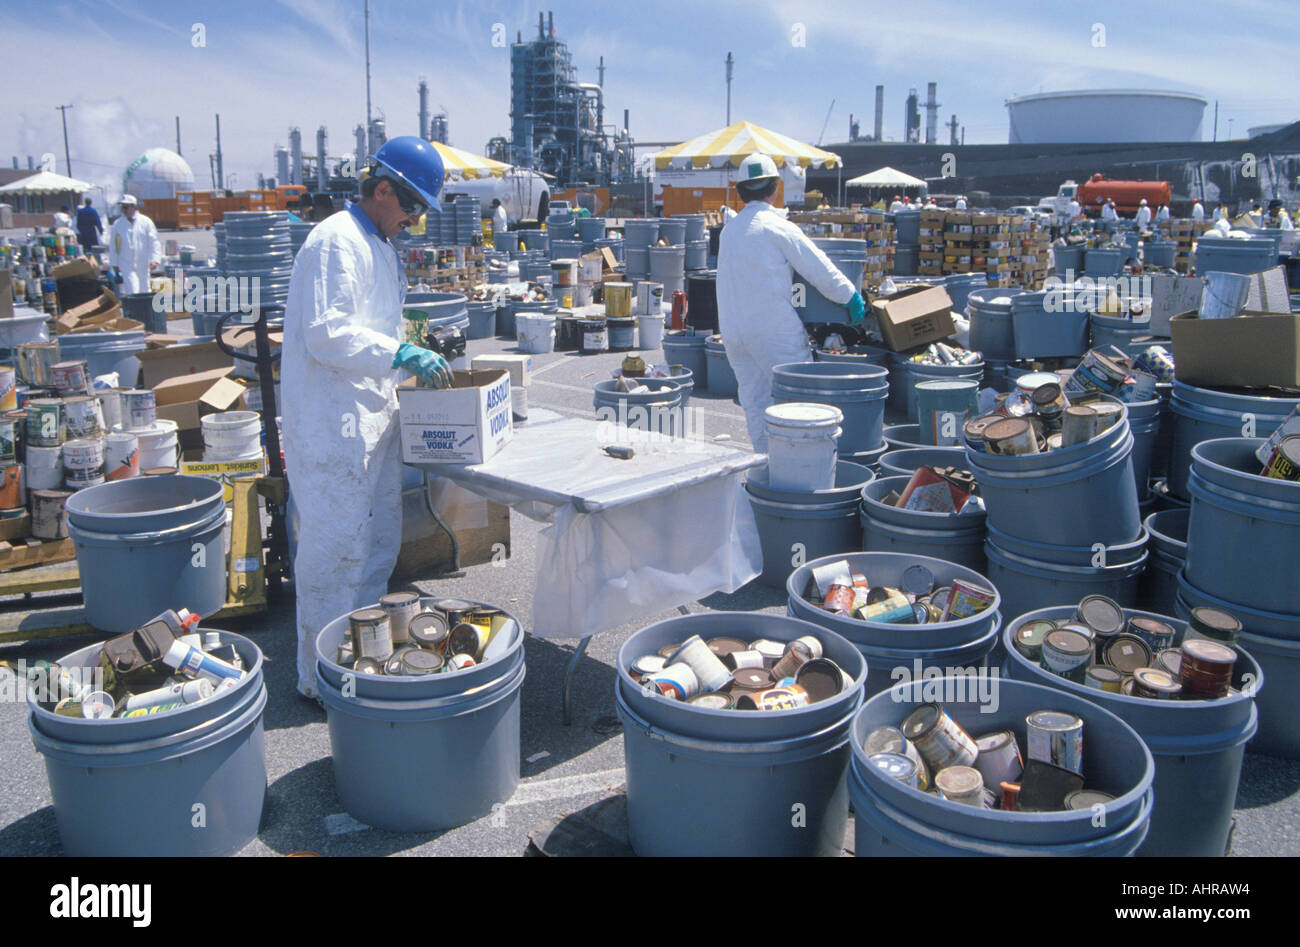 Workers handling toxic household wastes at waste cleanup site on Earth Day at the Unocal plant in Wilmington Los Angeles CA Stock Photo